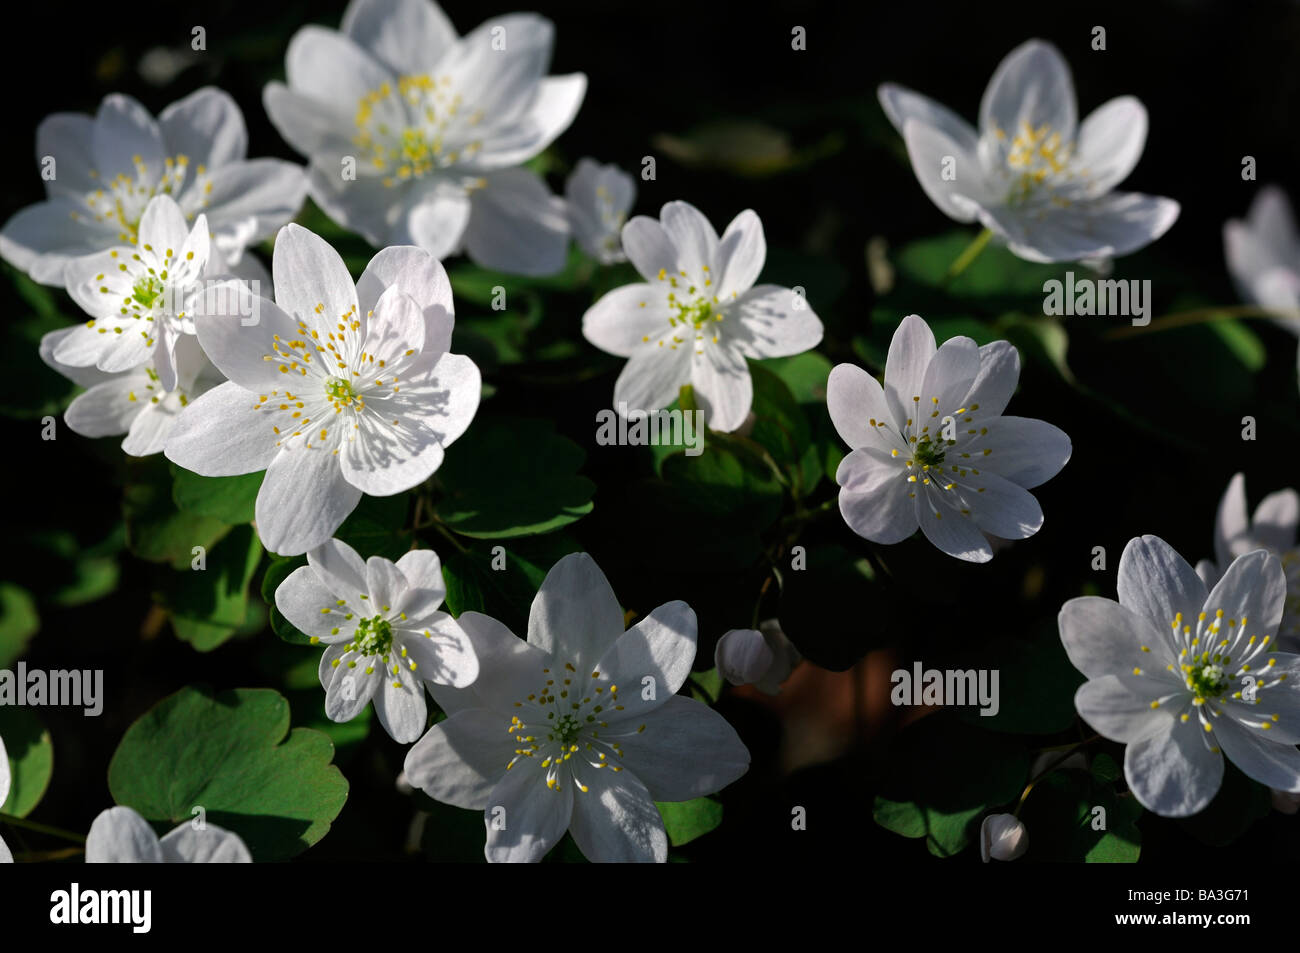 Anemonella Thalictrum thalictroides Rue-Anemone white delicate Spring wildflower Great Smoky Mountains National park tennessee Stock Photo